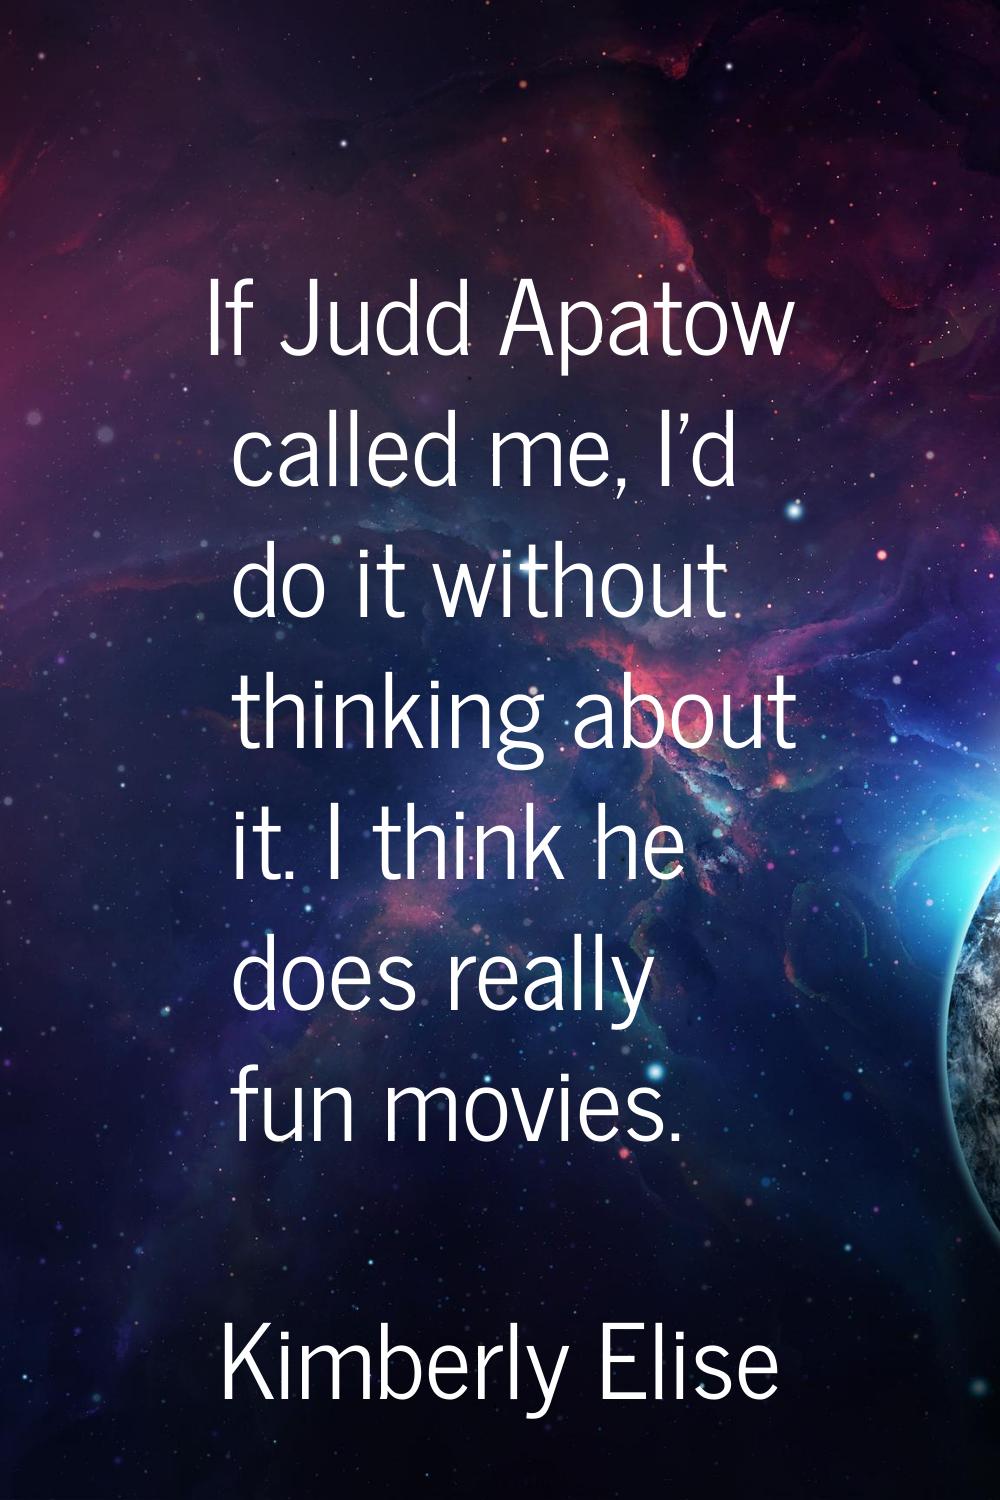 If Judd Apatow called me, I'd do it without thinking about it. I think he does really fun movies.